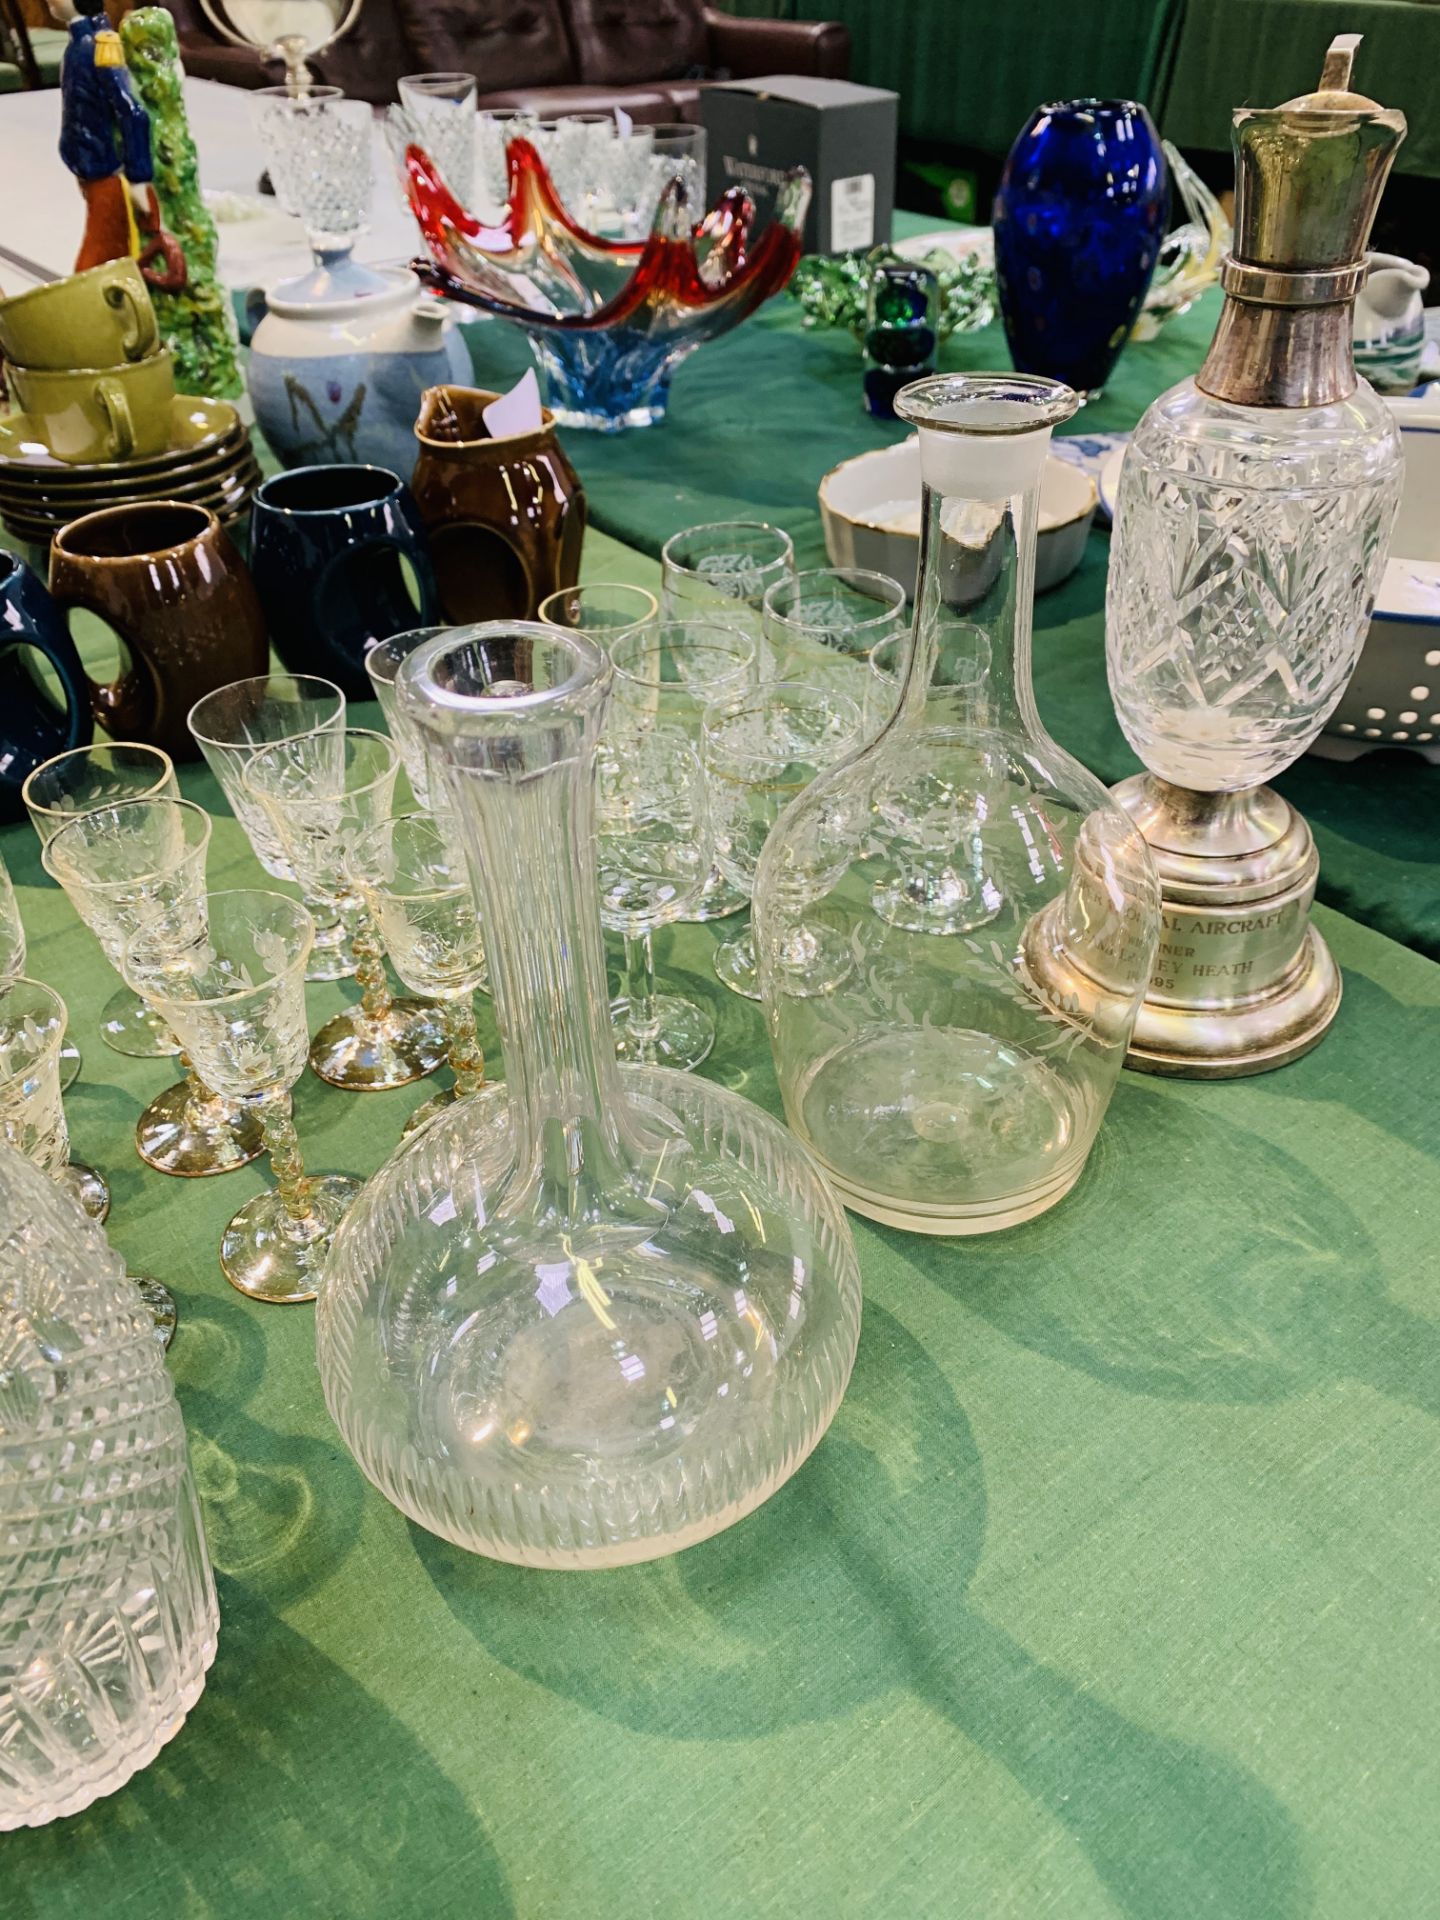 Quantity of vintage glassware including glasses, vases, decanters and cut crystal items. - Image 3 of 3